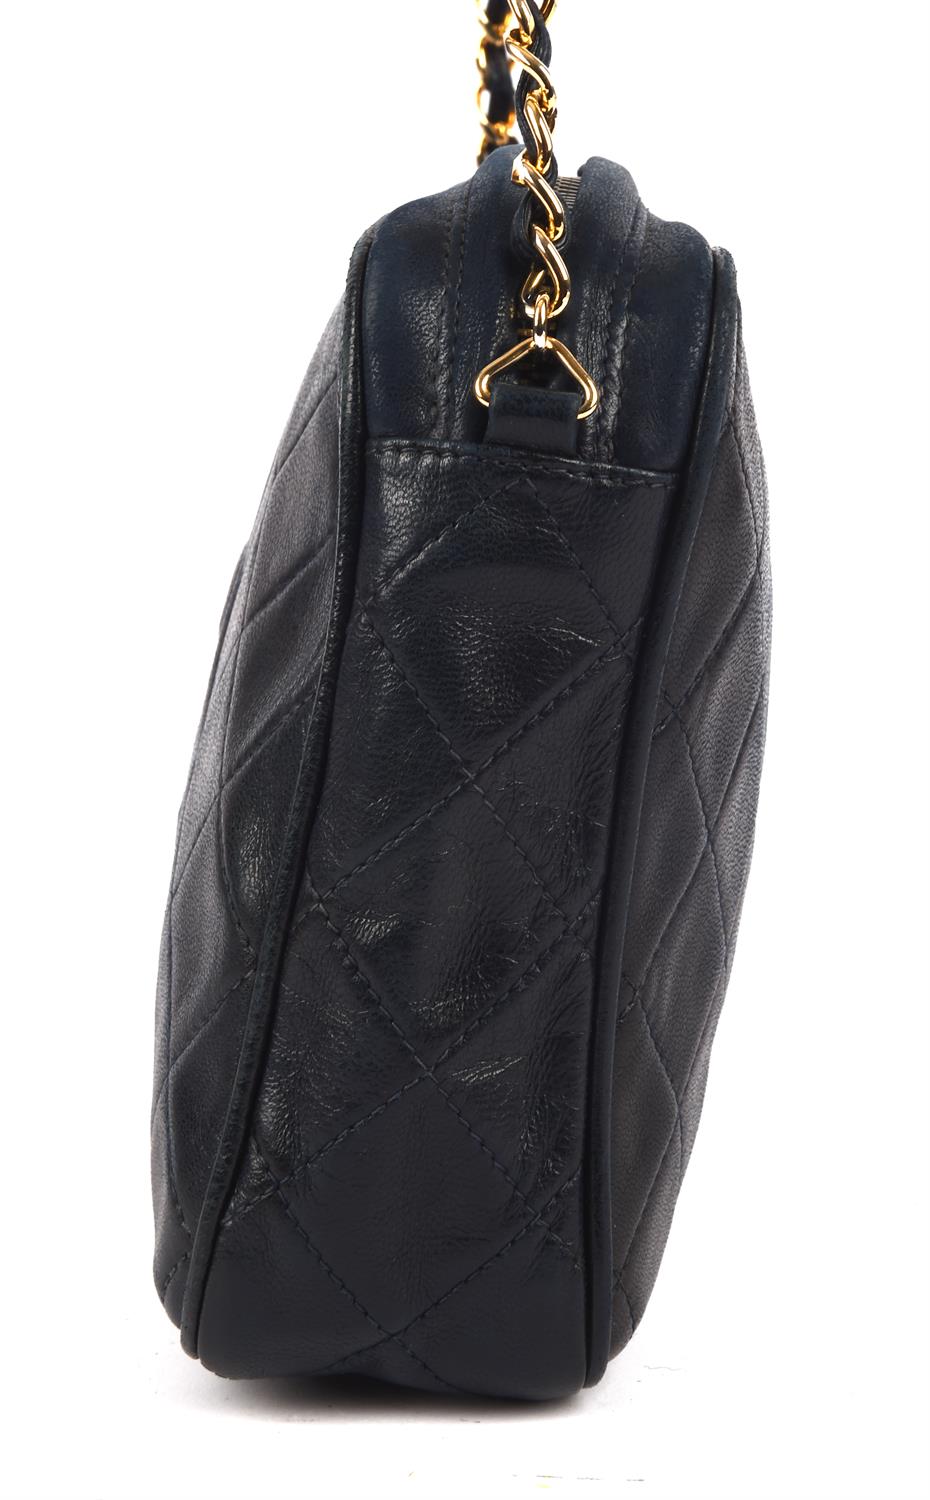 CHANEL navy blue lambskin leather matelasse chain shoulder bag with gold hardware with copy of - Image 4 of 8